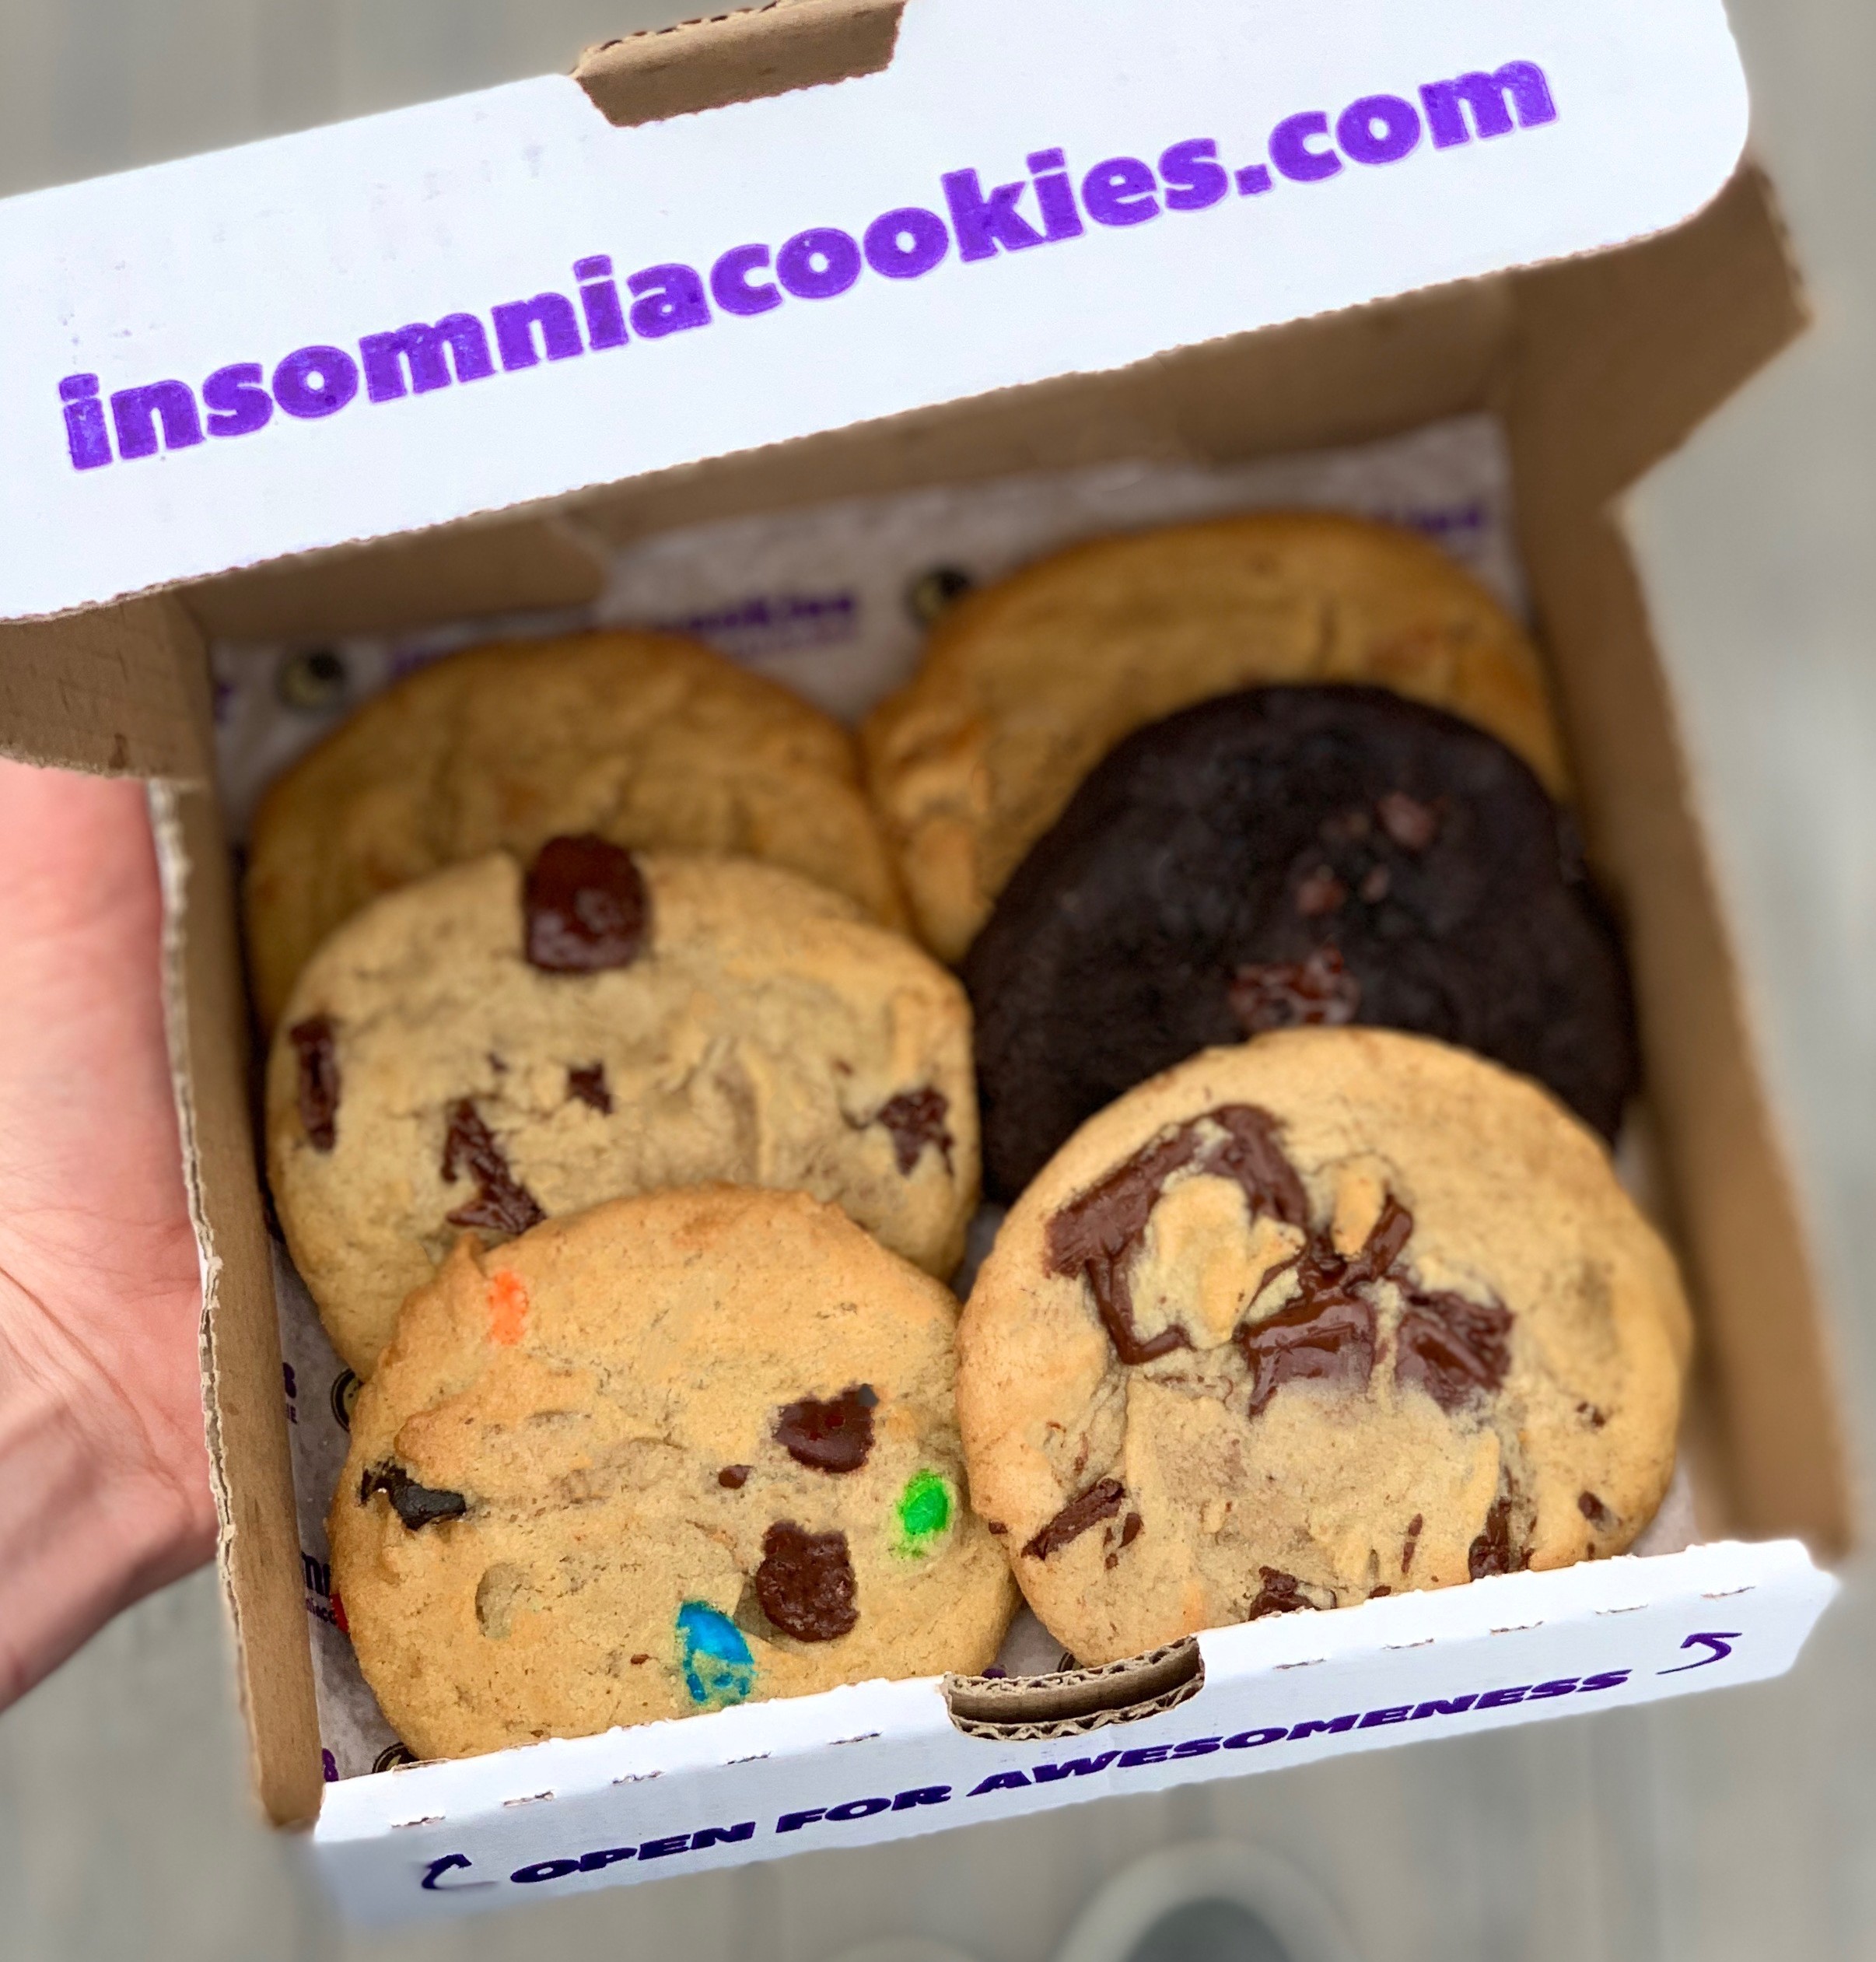 Insomnia Cookies Exclusive Free 6 Pack Loyalty Program Deal Going Down This Week Cookie Dough Loyalty Members Get A Free 6 Pack With Any 10 Purchase W Code 6packwelcomeback All Week Long Not A